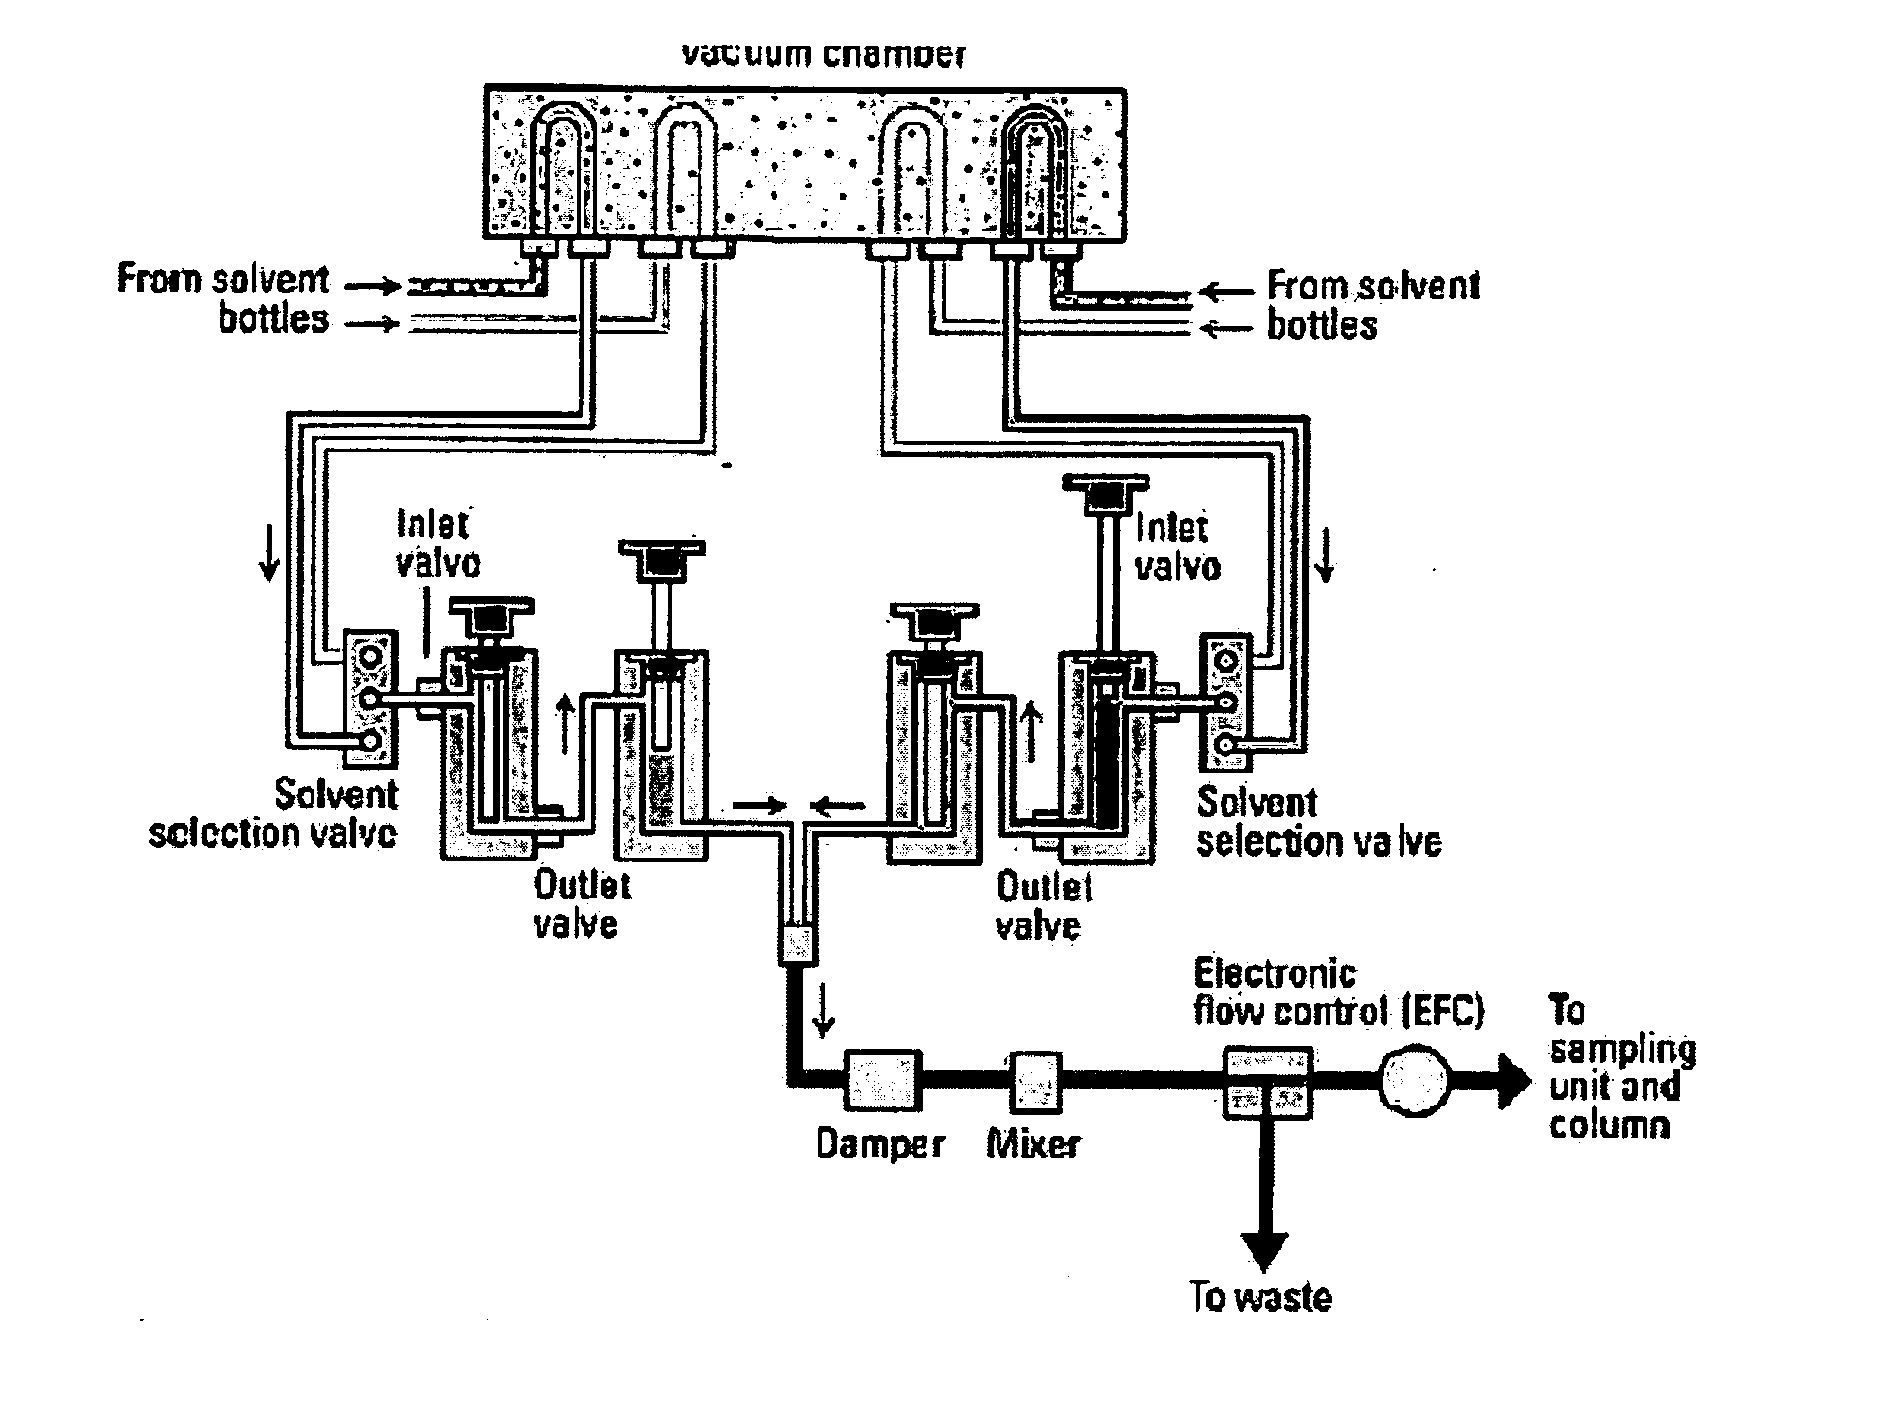 Devices, systems and methods for liquid chromatography